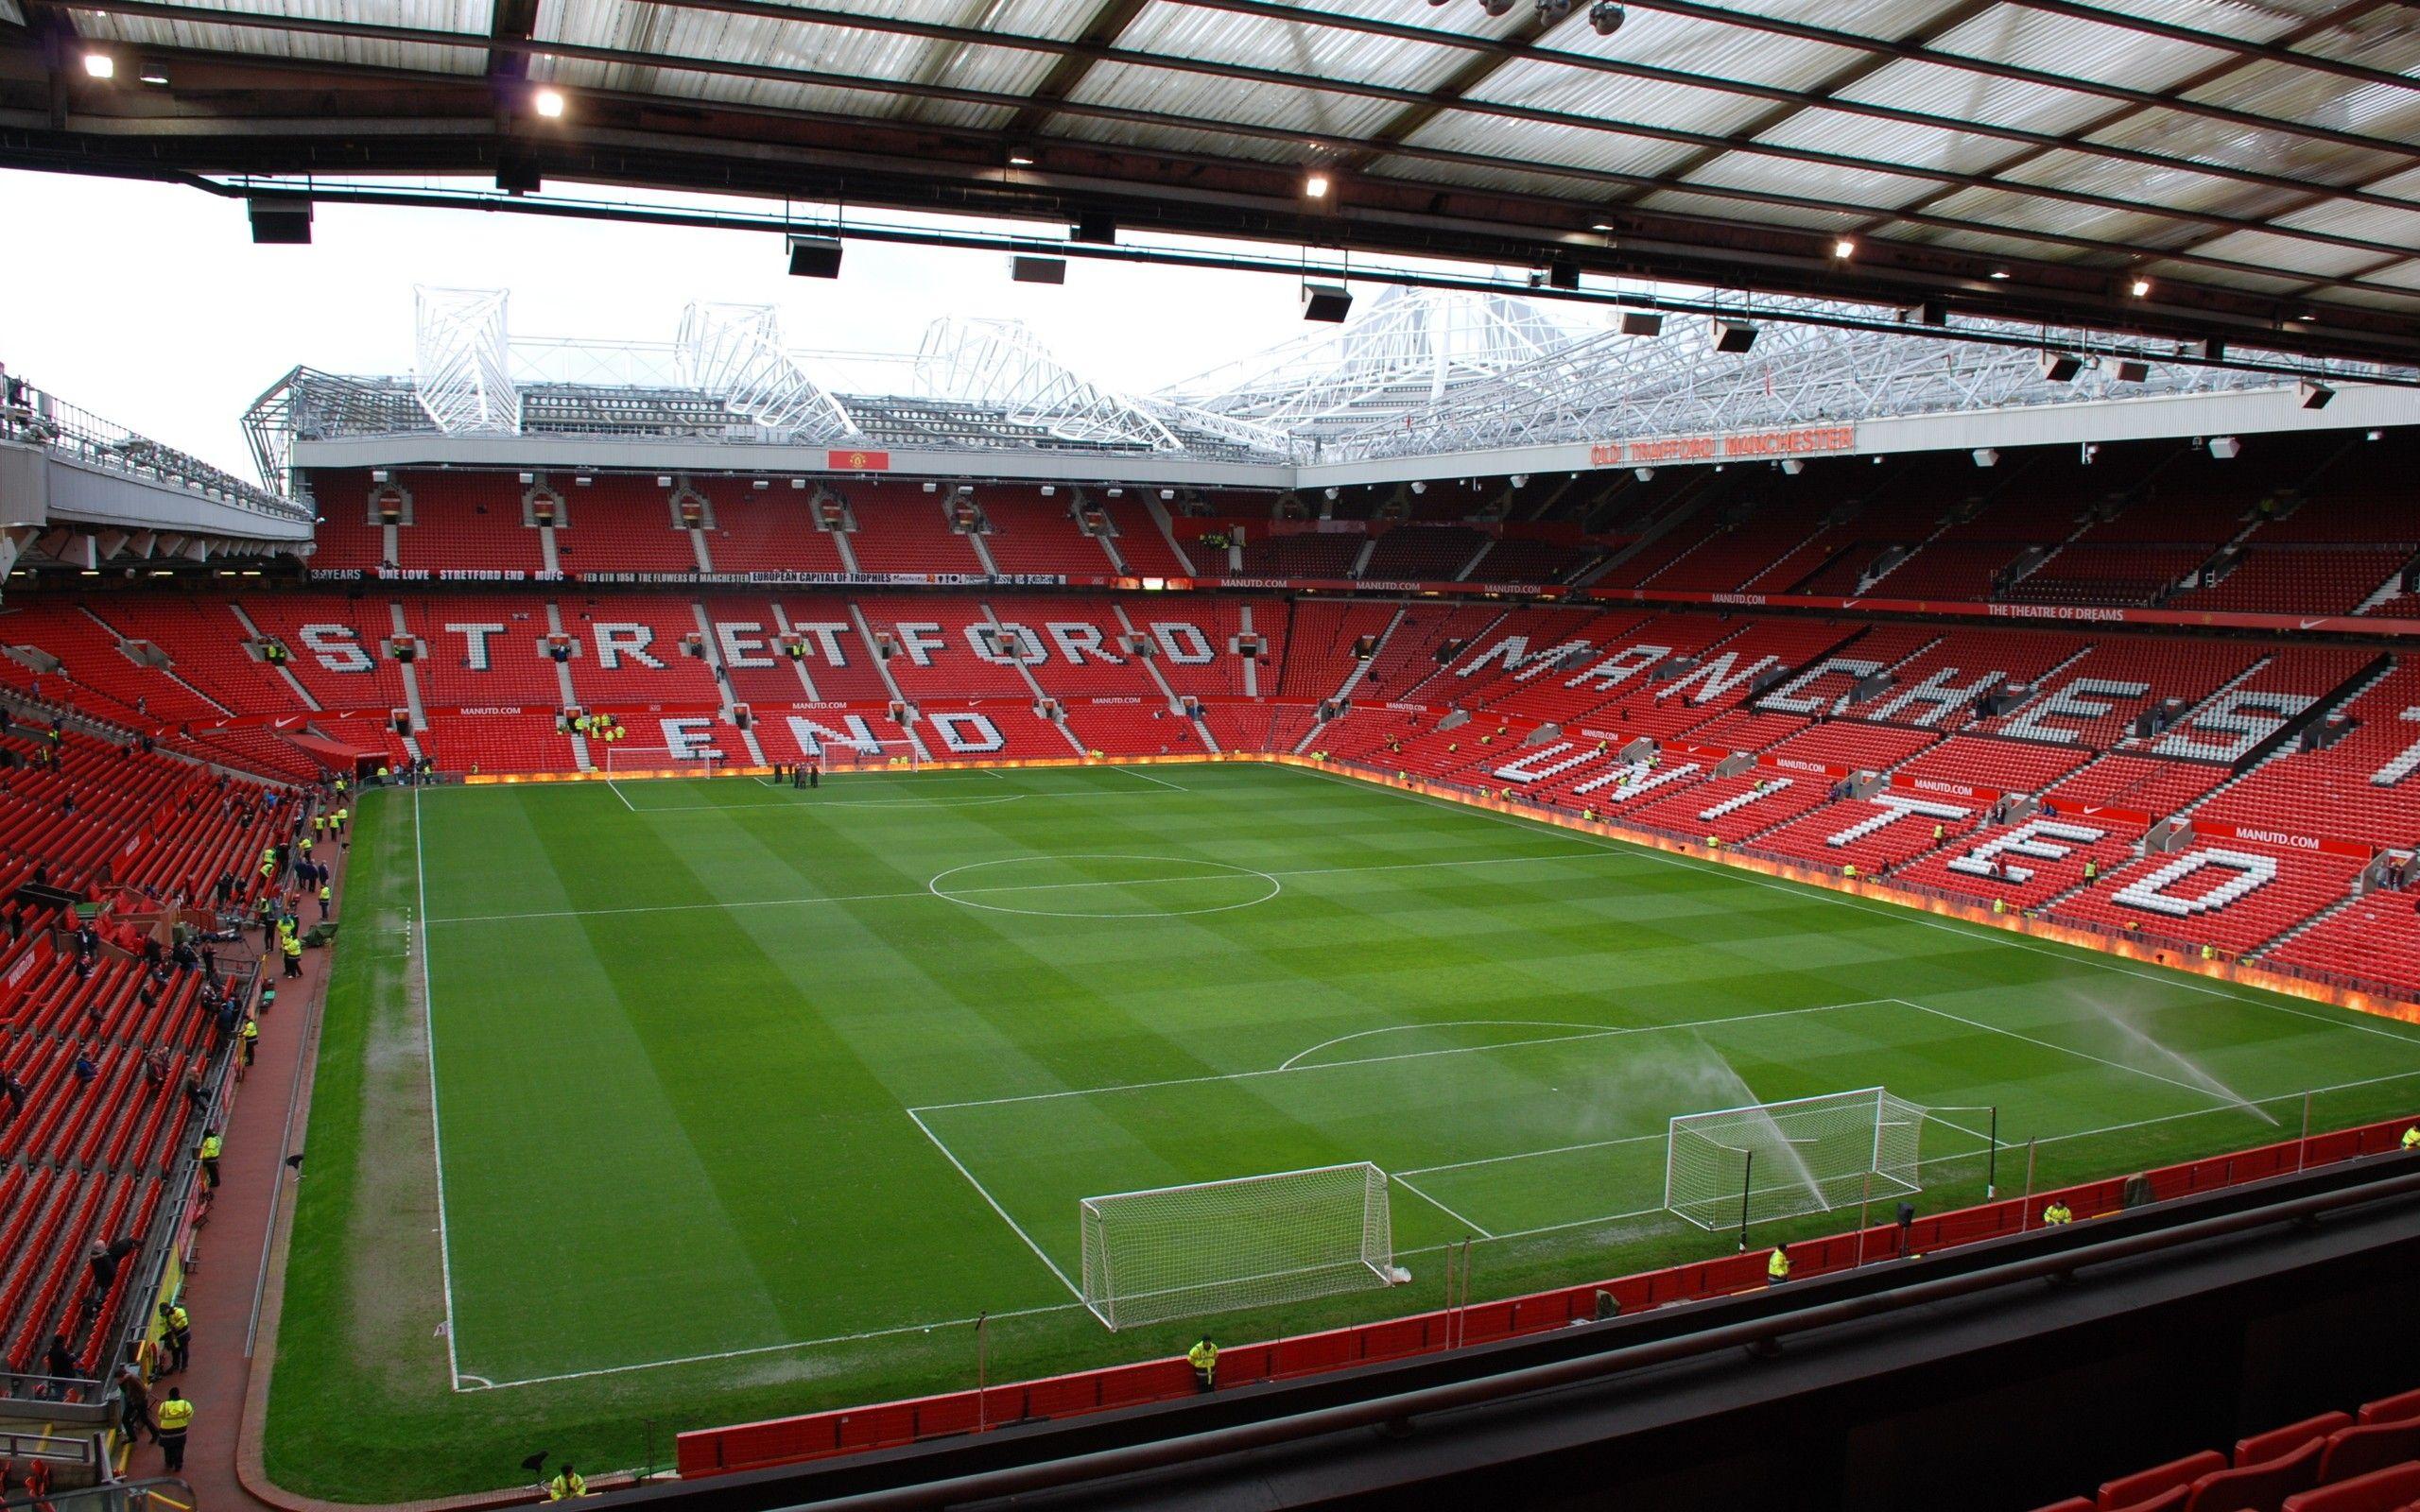 fields, stadium, Manchester United FC, Manchester United, Old